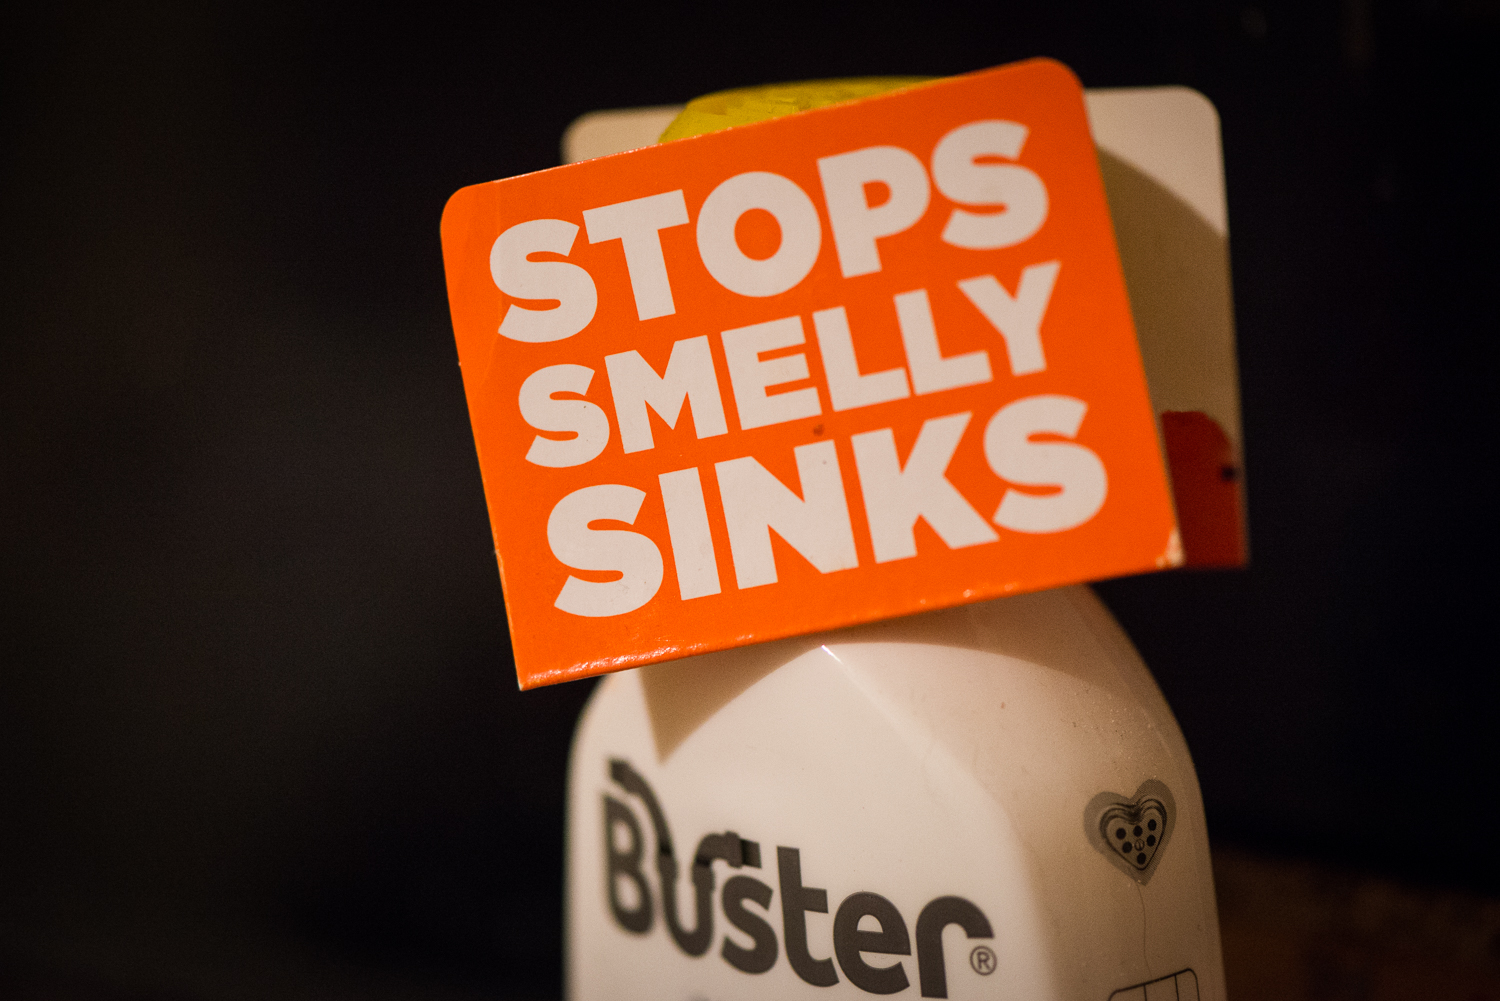 Stops Smelly Sinks